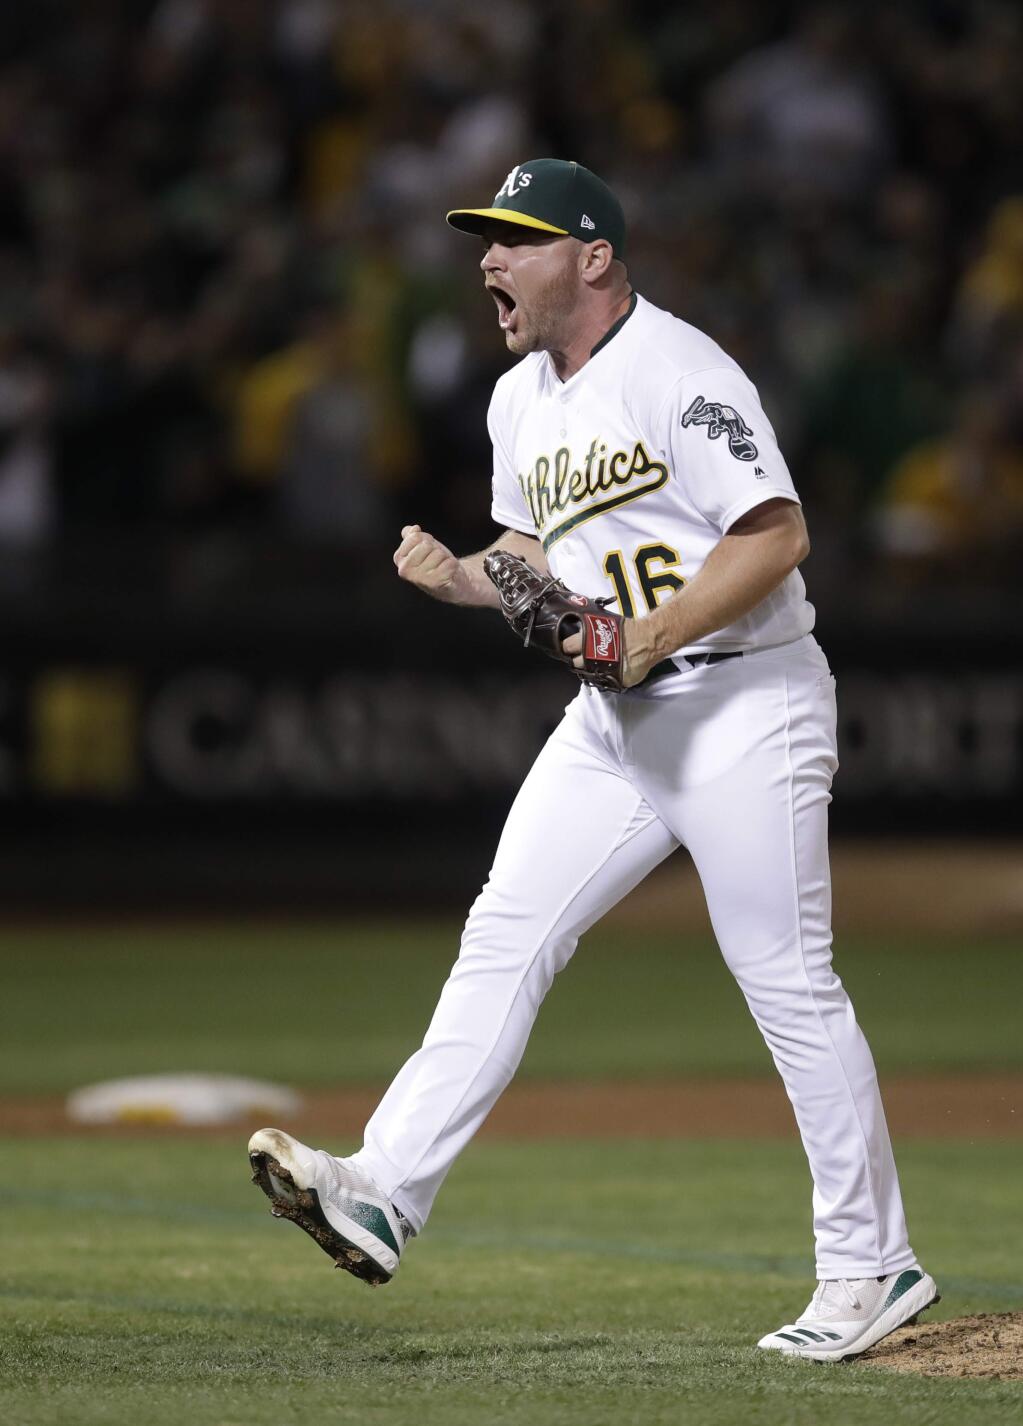 Oakland Athletics pitcher Liam Hendriks reacts as the final Kansas City Royals batter is retired Tuesday, Sept. 17, 2019, in Oakland. (AP Photo/Ben Margot)